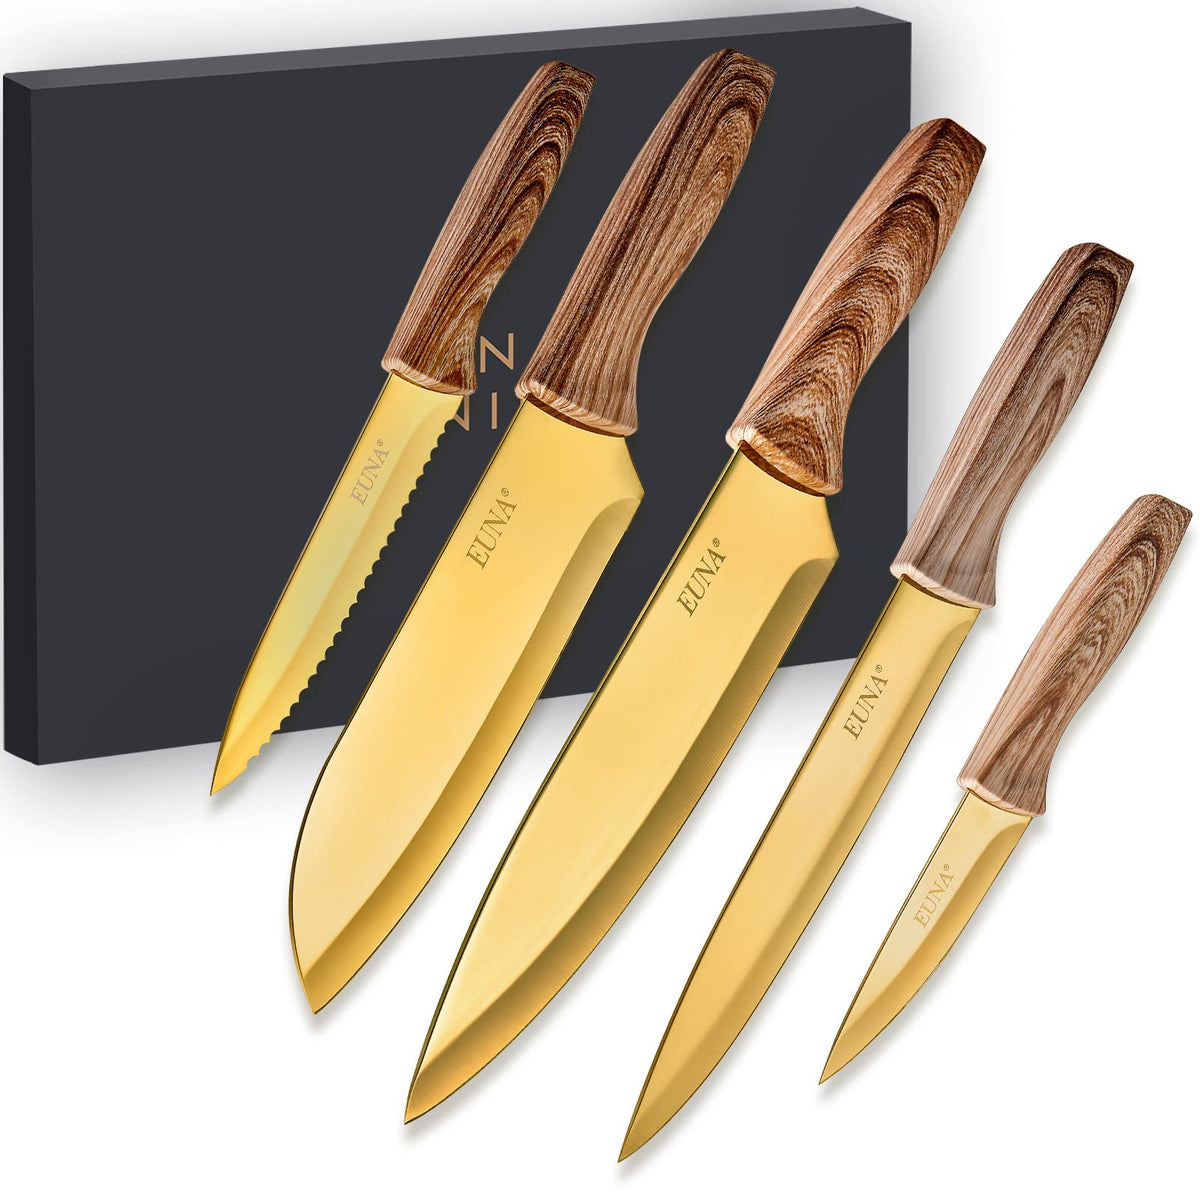  Bravedge 5 PCS Kitchen Knife Set, Kitchen Knives Professional  with Sheaths and Gift Box, High Carbon Stainless Steel Ultra Sharp Chef Knife  Set for Multipurpose Cooking with Ergonomic Handle: Home 